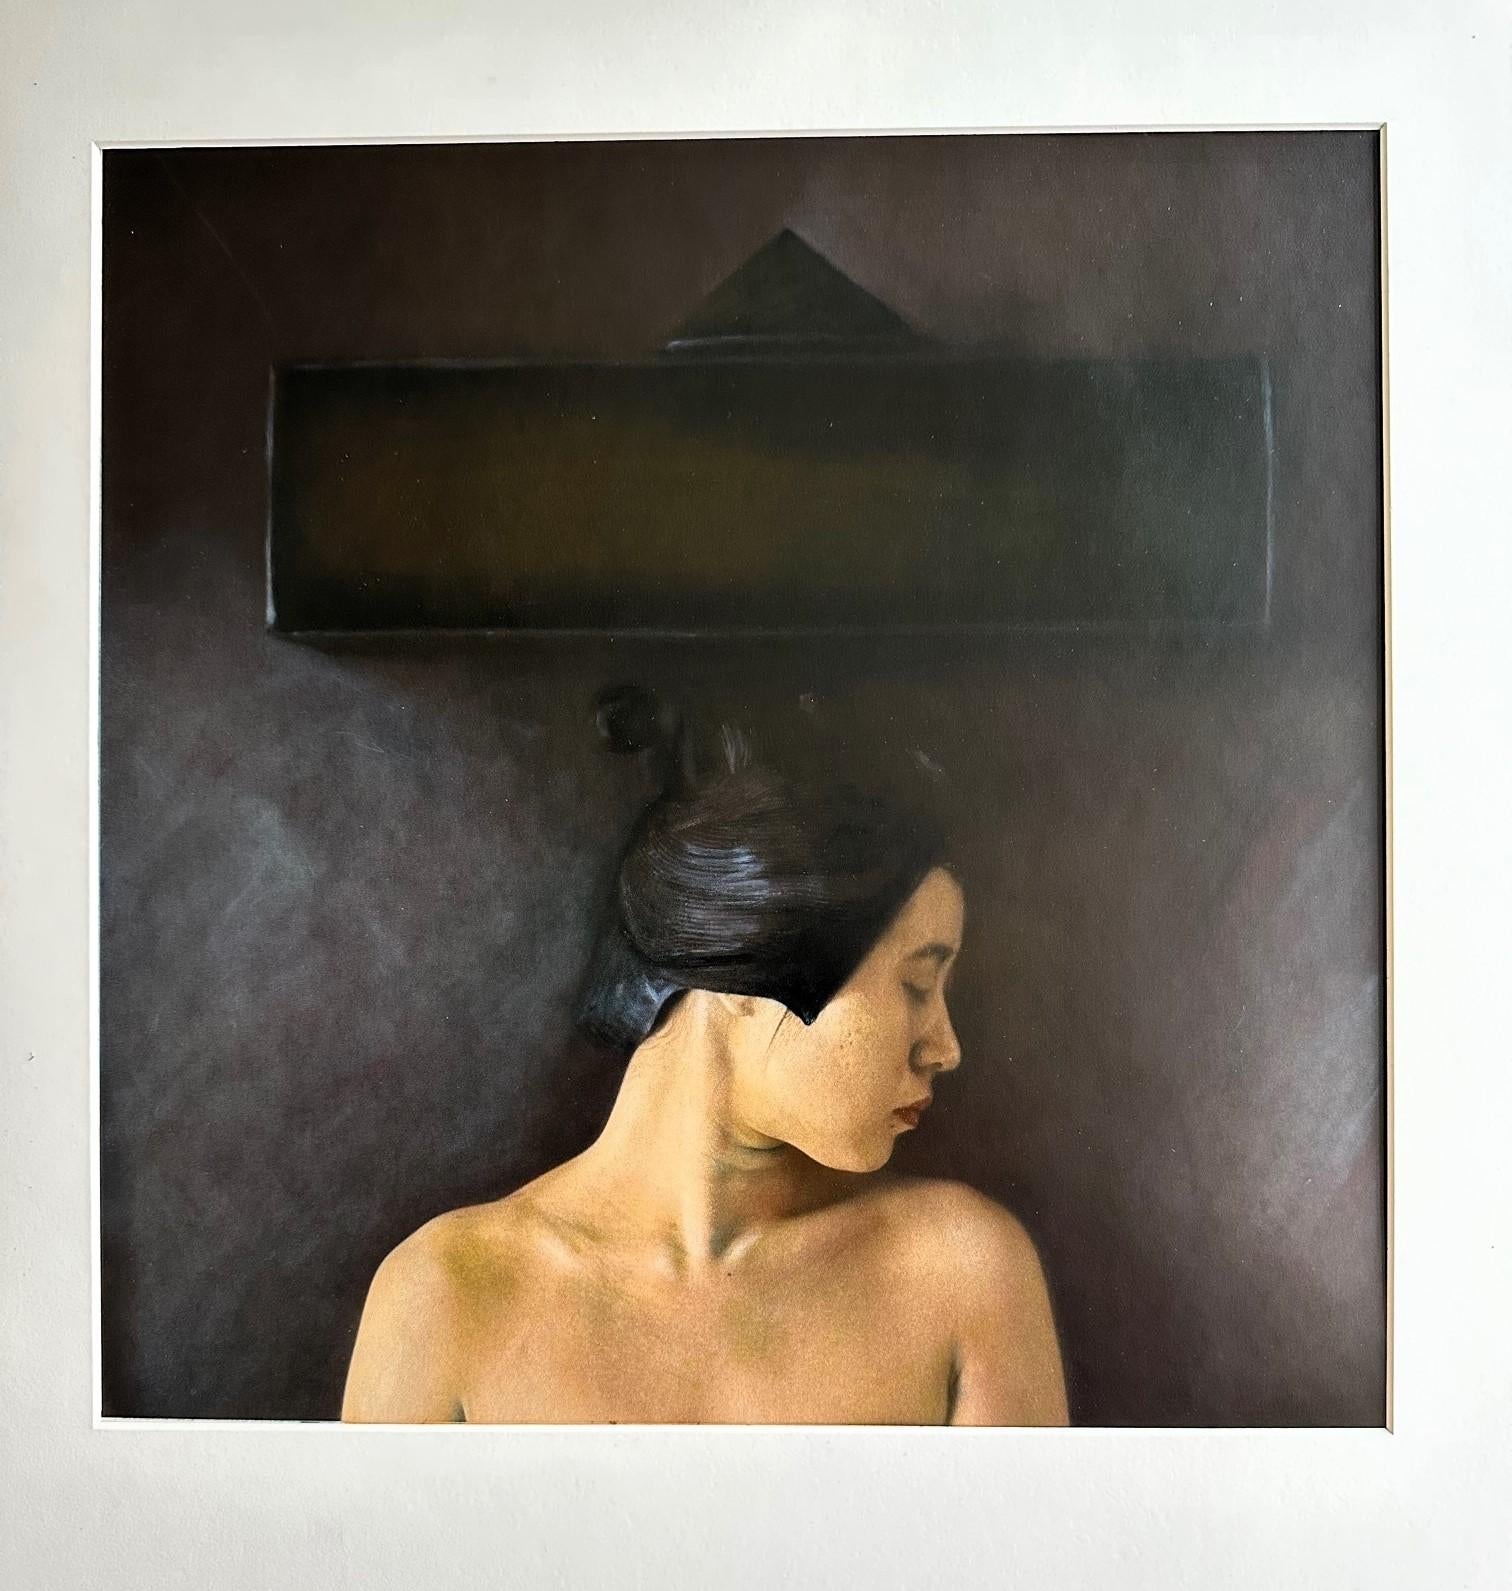 Artist: Susan Fenton (1949-2018; American)
Title: Figure with Rectangle and Cone. Japan series
Year of Creation: 1993
Edition: 1/10
Medium: Toned Gelatin Silver Print; hand painted with Oils
Image size: 16